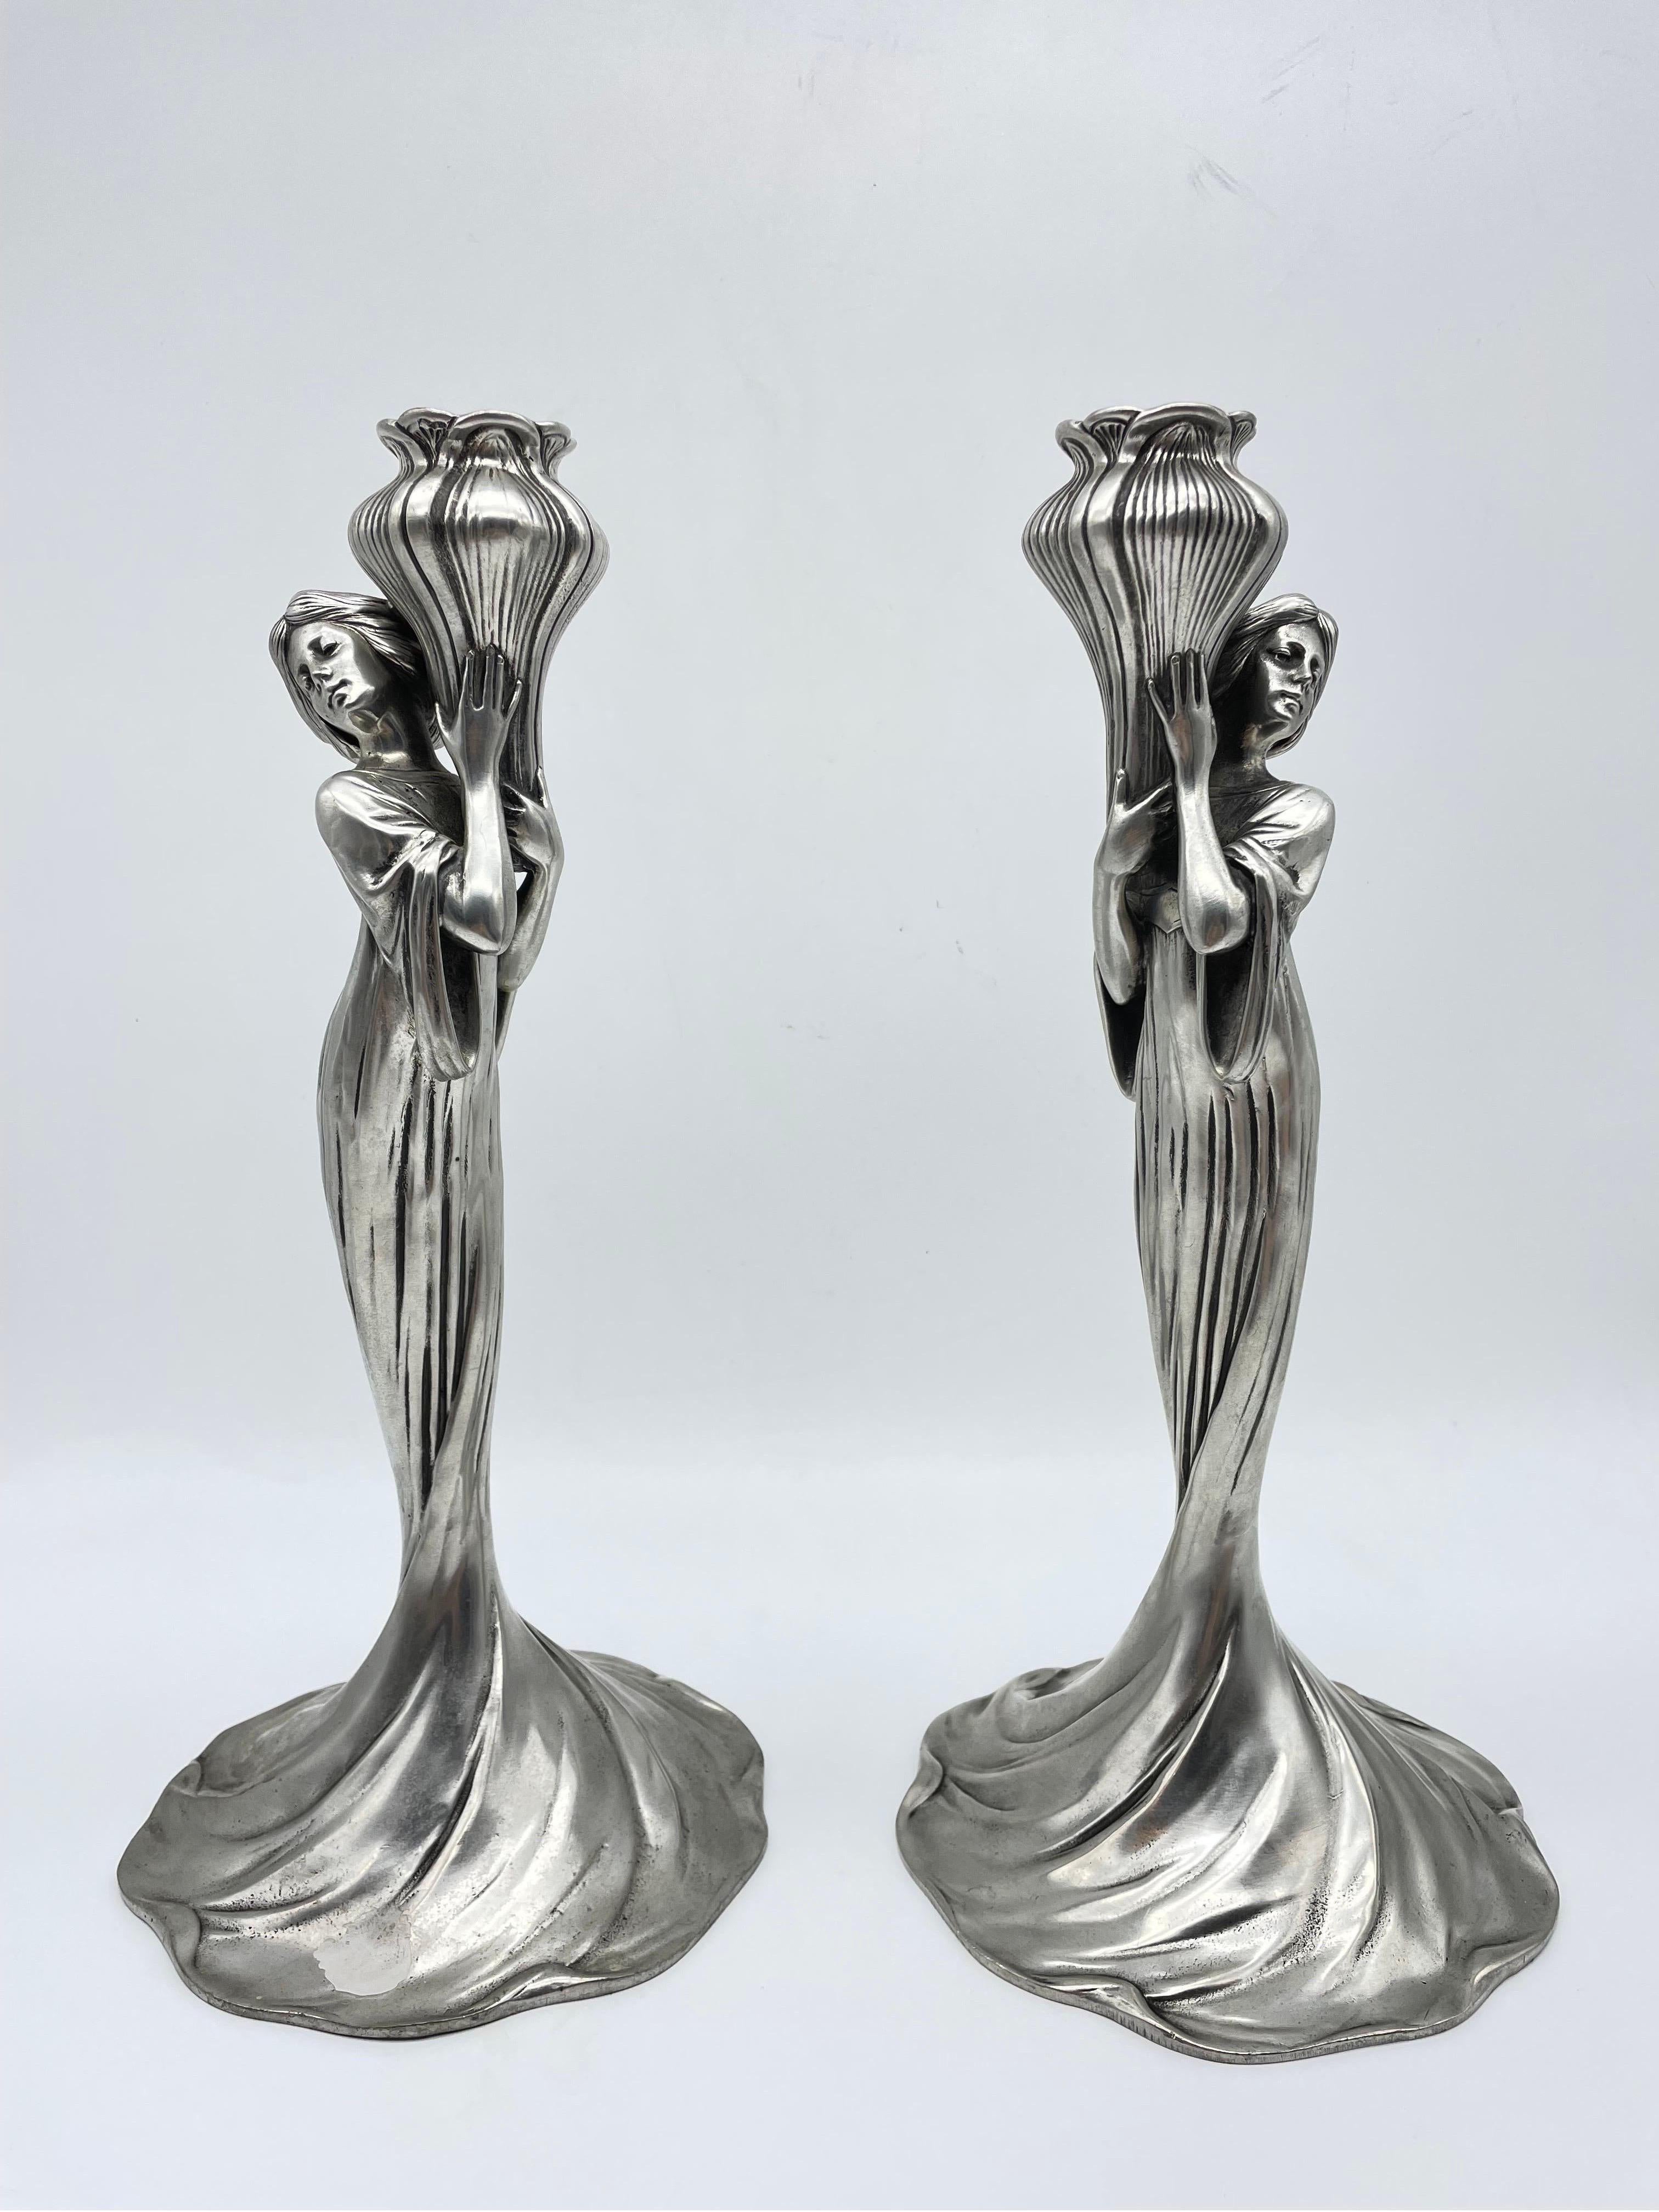 A pair of Achille Gamba (Italian, 1881 - 1941) for Edles Zinn (Pewter) Art Nouveau German pewter candlestick holders having a figural design depicting women holding flower pistils. Each fully hallmarked to bottoms.